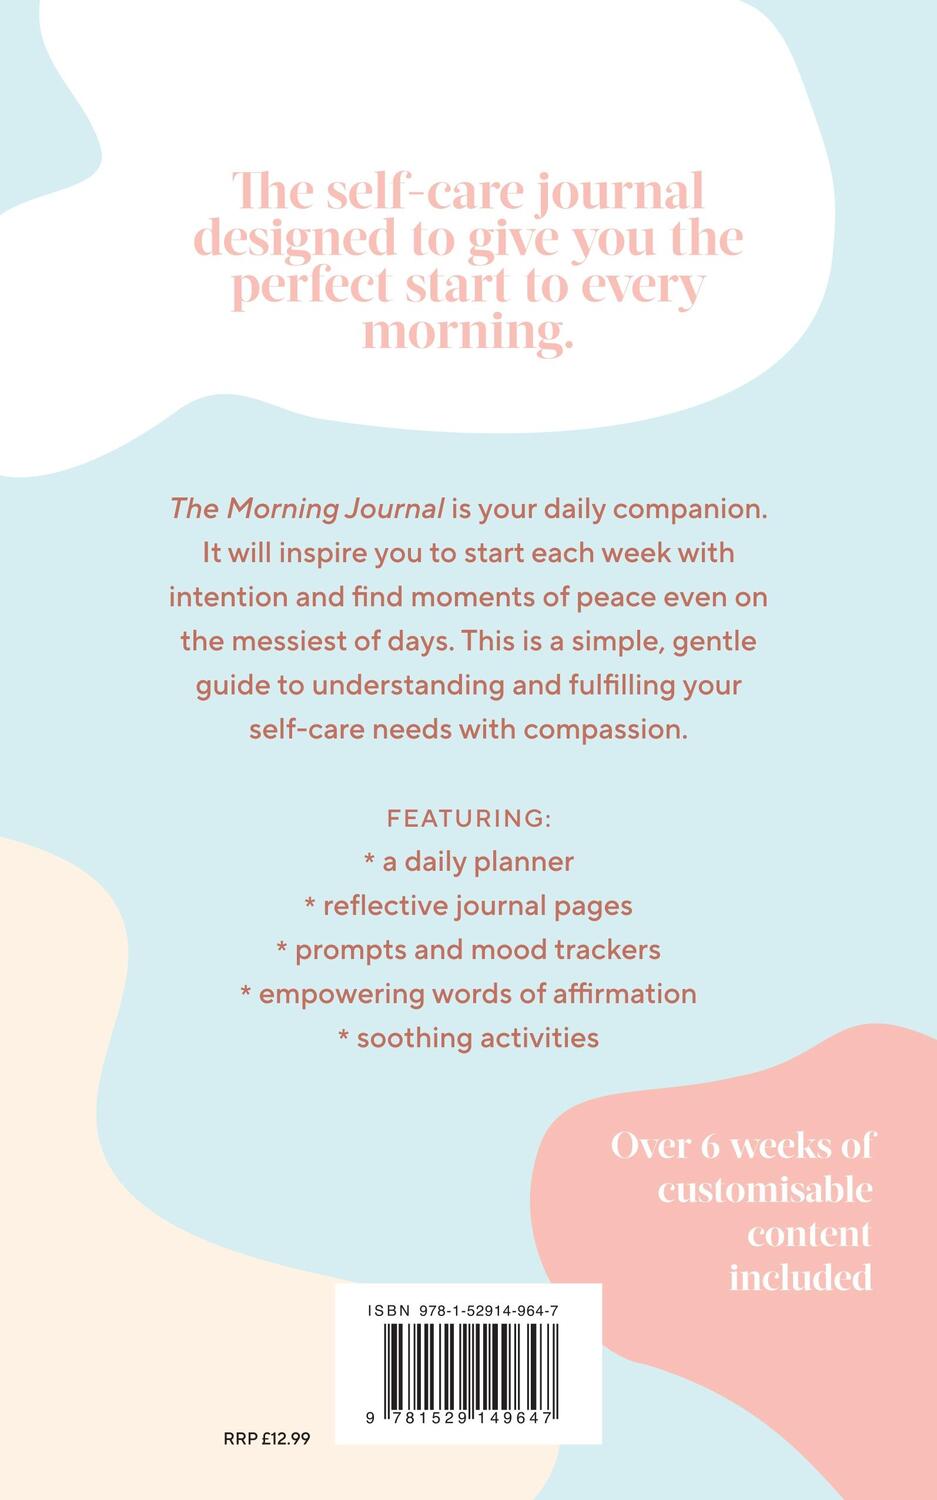 Rückseite: 9781529149647 | The Morning Journal | Five minutes a day to soothe your soul | Supply